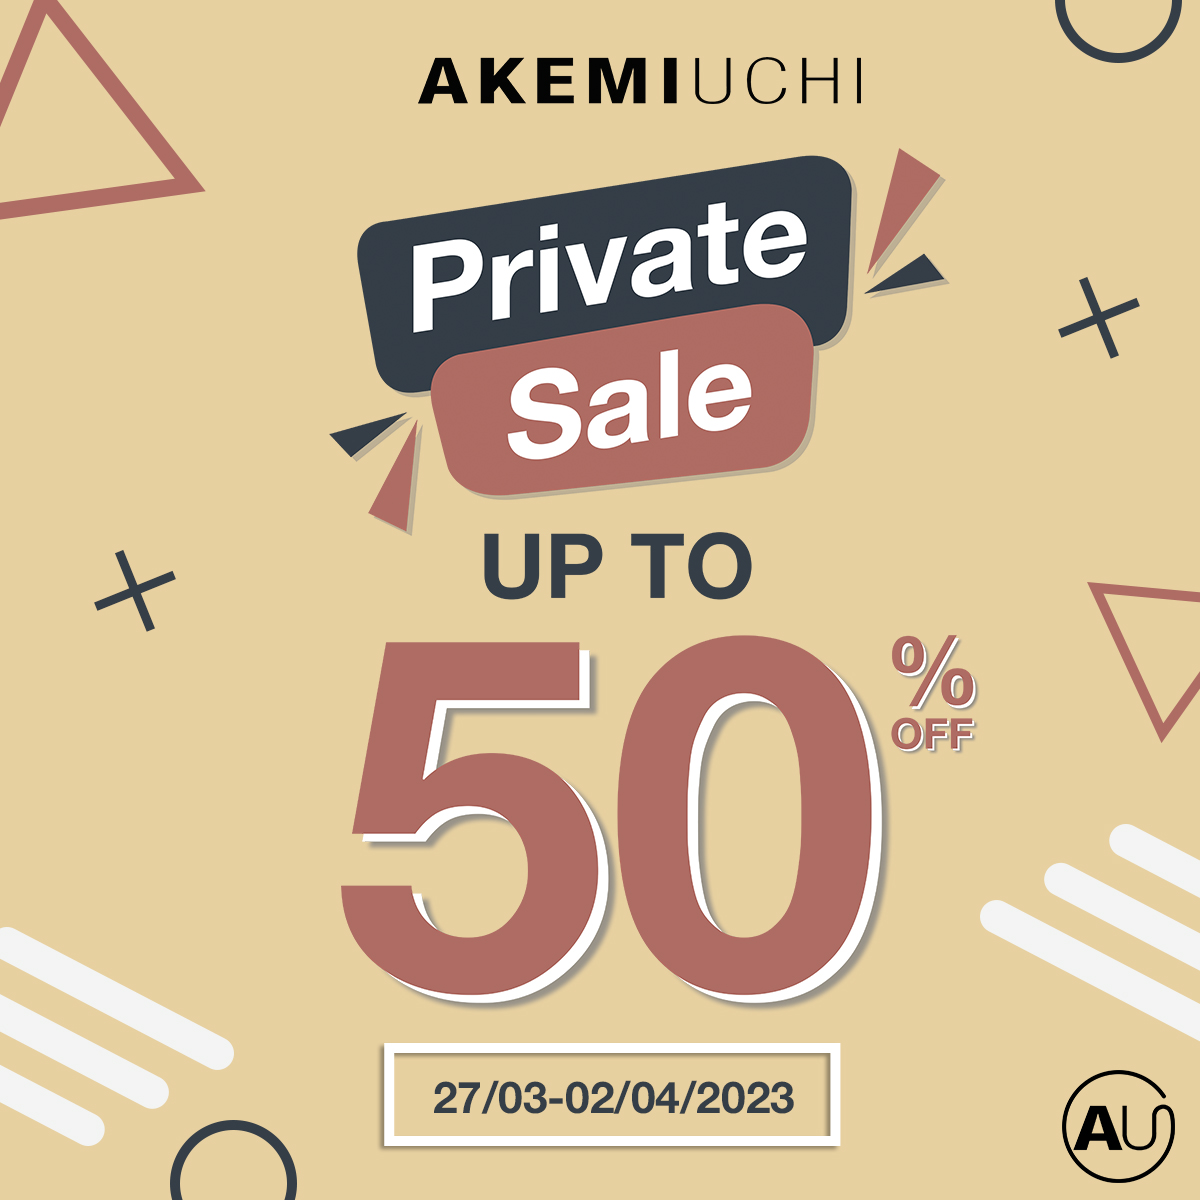 ⚡ 𝐏𝐑𝐈𝐕𝐀𝐓𝐄 𝐒𝐀𝐋𝐄 – SALE UP TO 50% ALL ITEMS ⚡